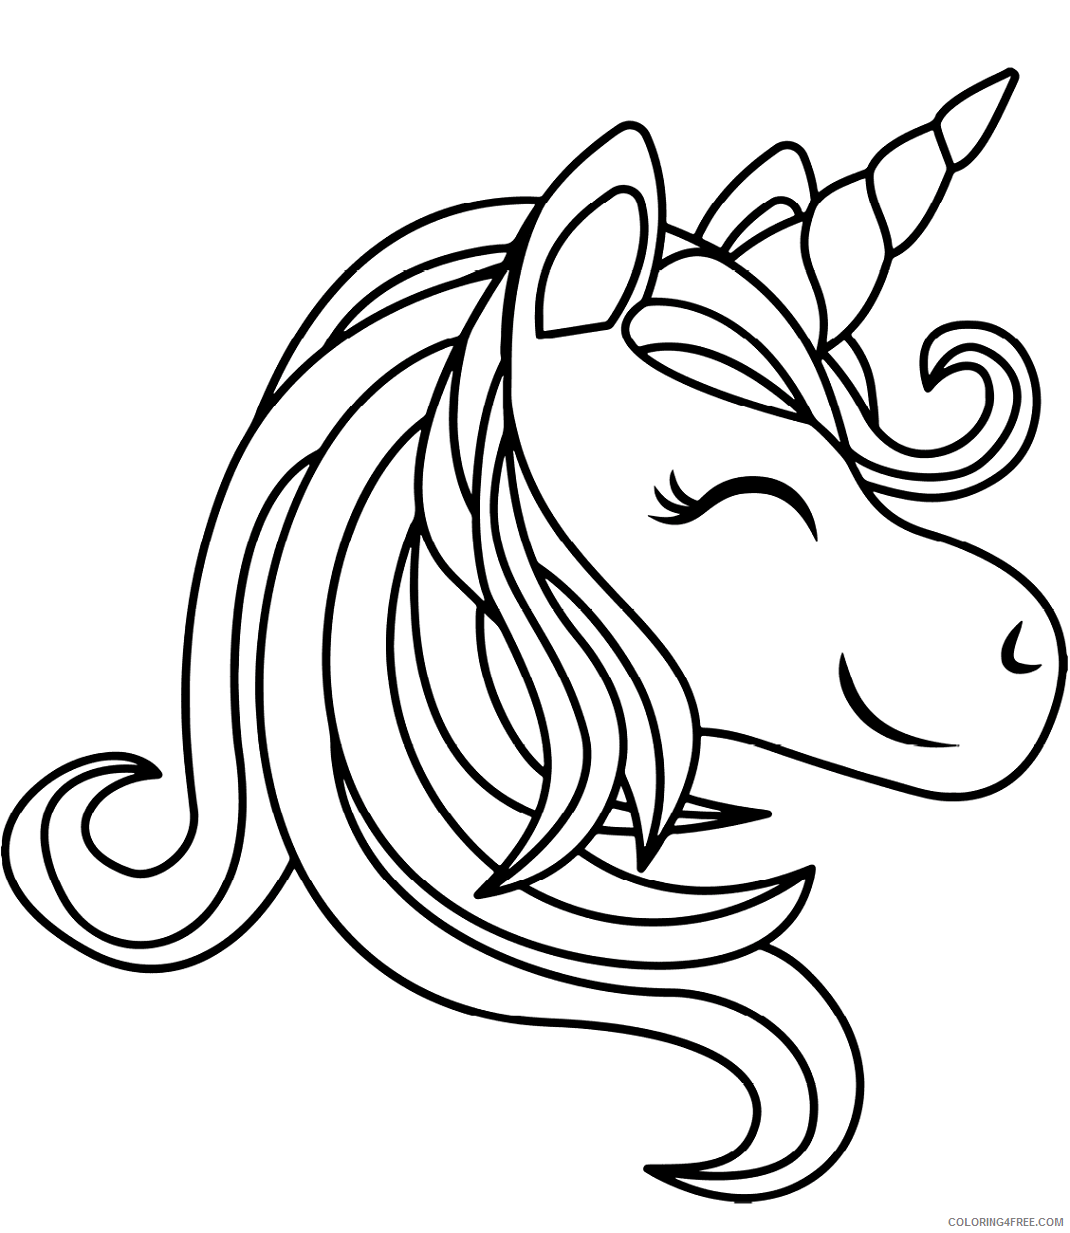 Unicorn Coloring Pages unicorn_head_smiling Printable 2021 6057 Coloring4free